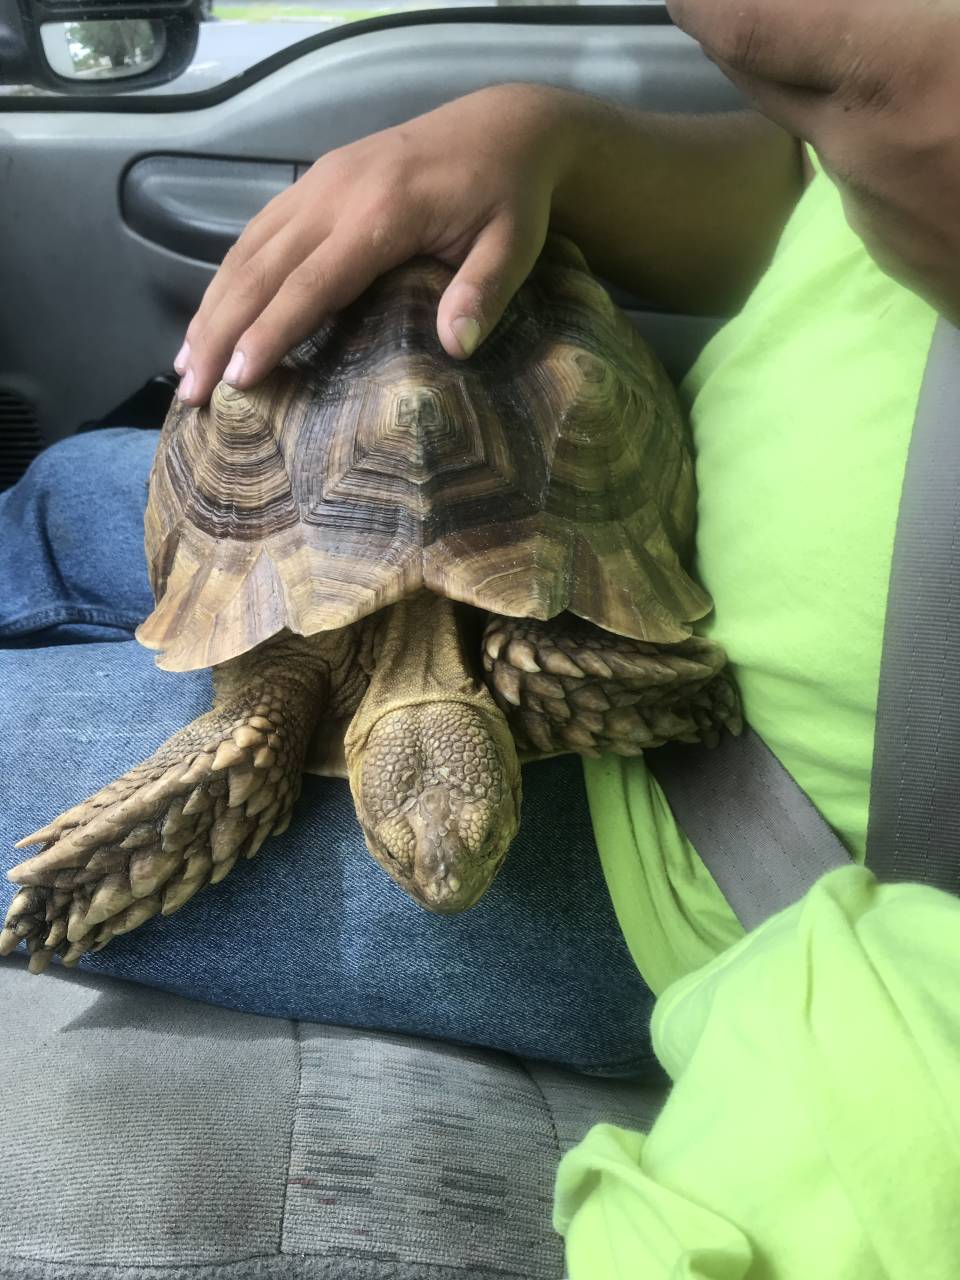 African spurred tortoise named Lady